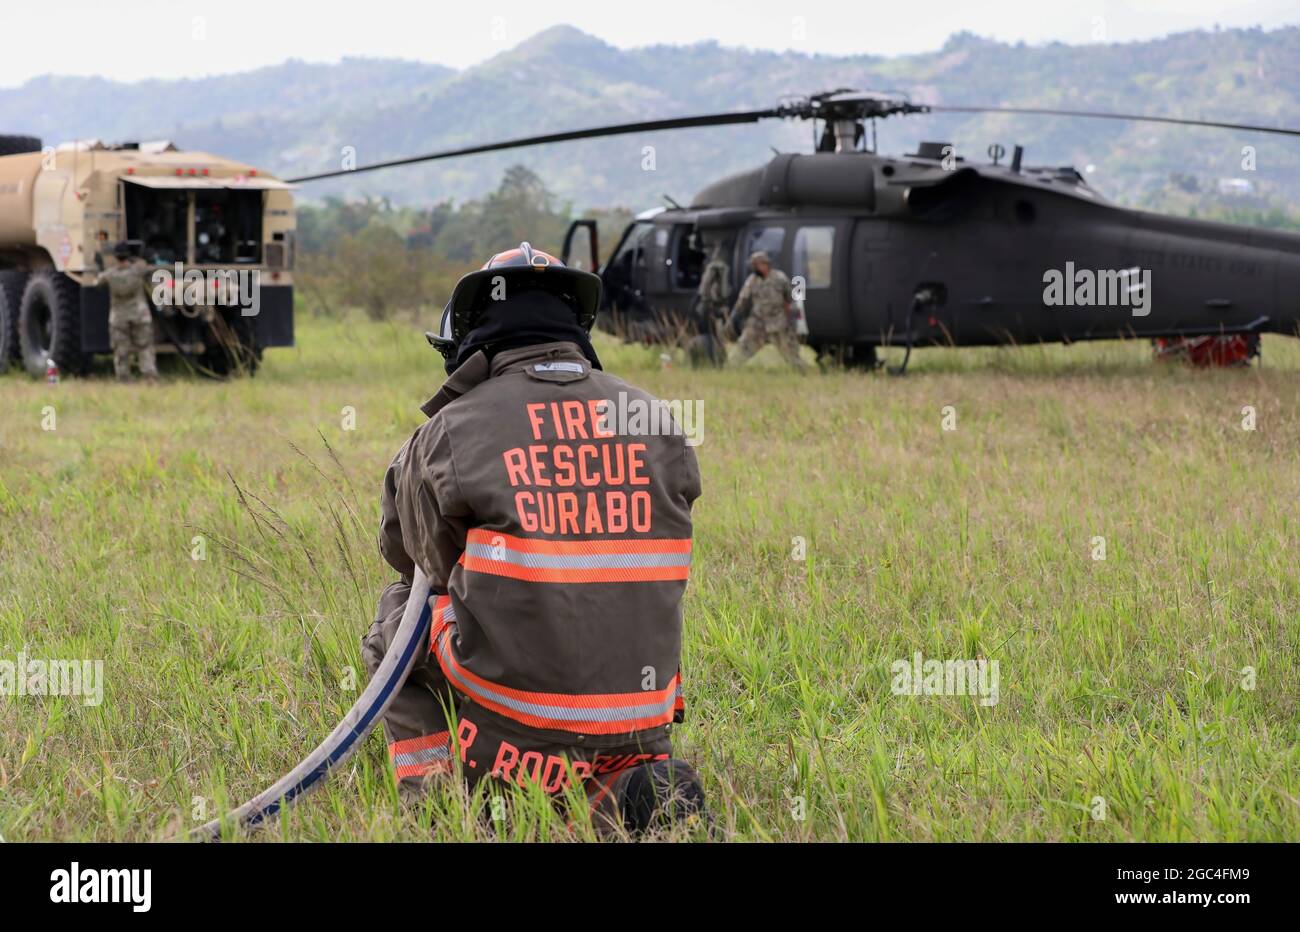 A fireman of the municipality of Gurabo stands ready for a fire emergency during the fueling process of the UH-60 Black Hawk helicopter at Gurabo, Puerto Rico, May 22, 2021. The Governor of Puerto Rico, Pedro Pierluisi, activated the National Guard in support of the Puerto Rico Fire Department to fight fires in the municipalities of Gurabo and Cayey to protect residents' health, well-being, and property. (U.S. Army National Guard photo by Staff Sgt. Marimar Rivera Medina) Stock Photo